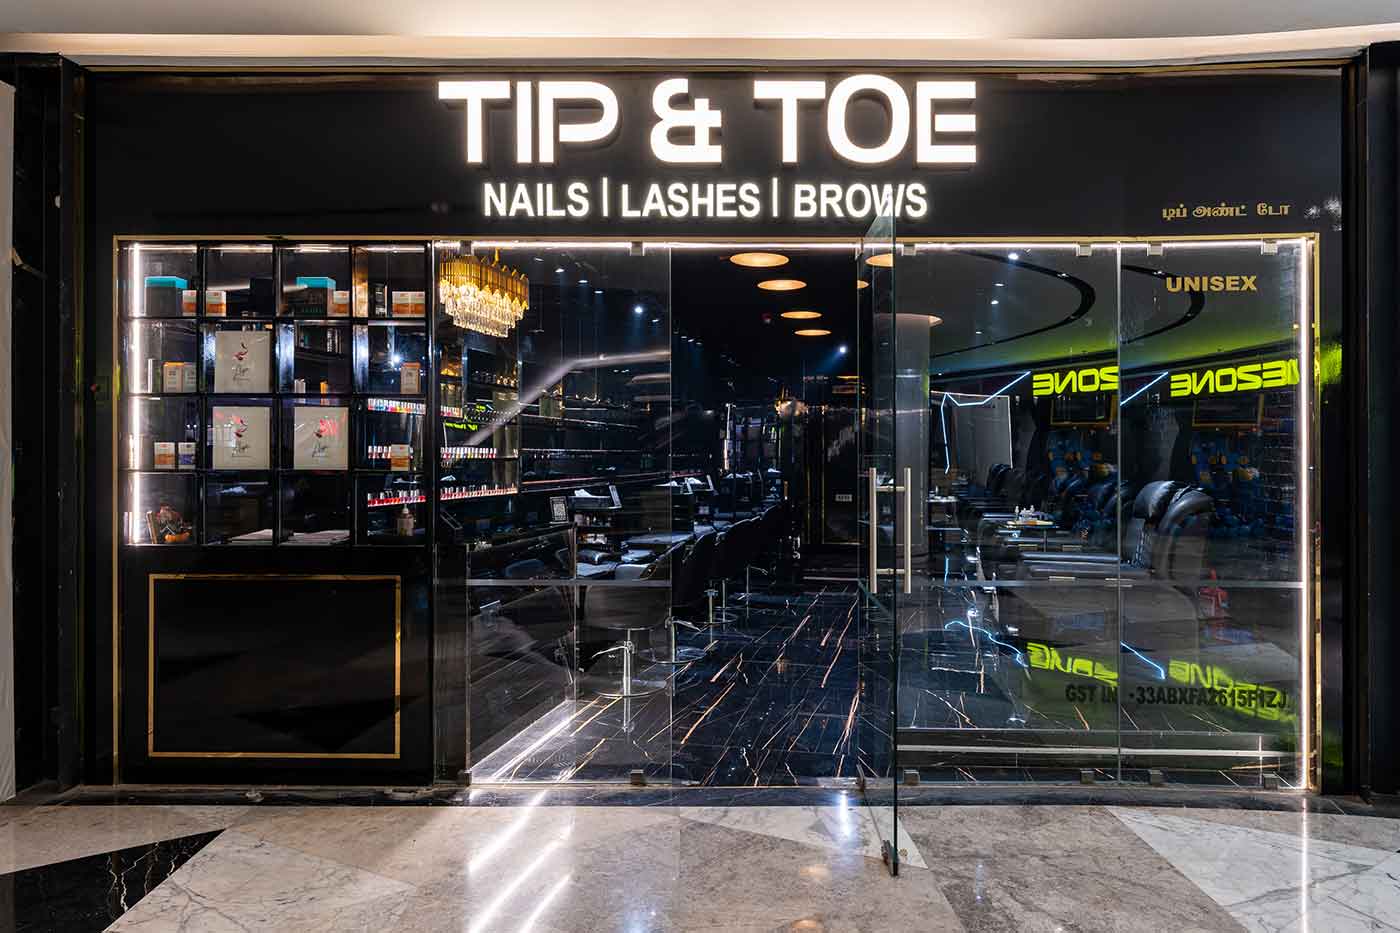 TIP&TOE salon opens its oulet in Chennai